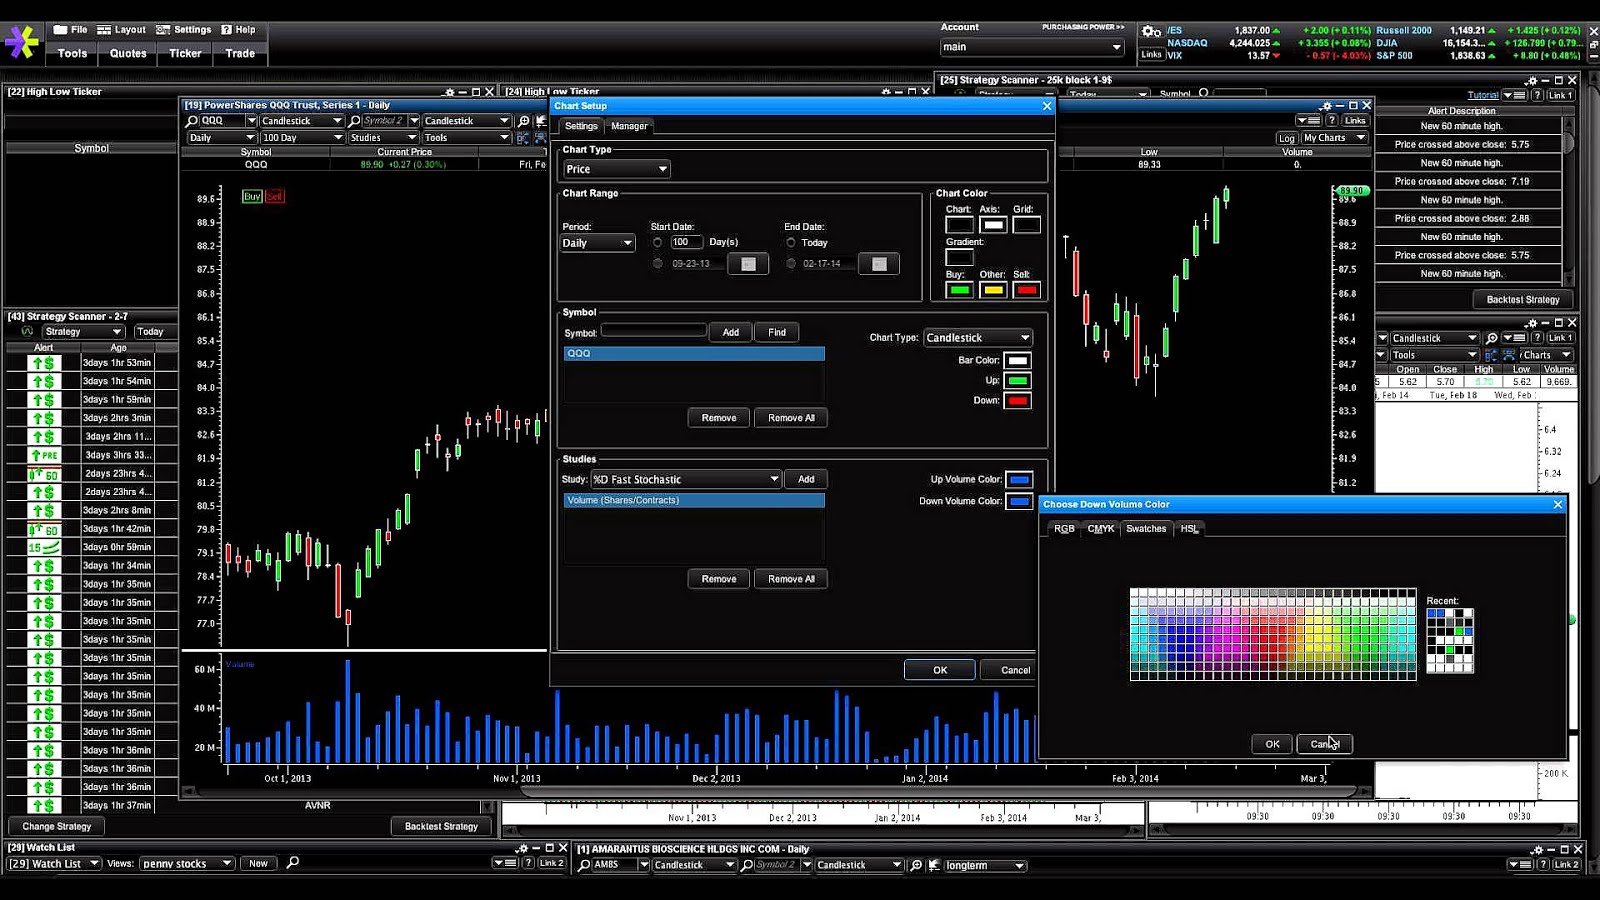 How To Buy And Sell Stocks On Etrade - Trade Choices